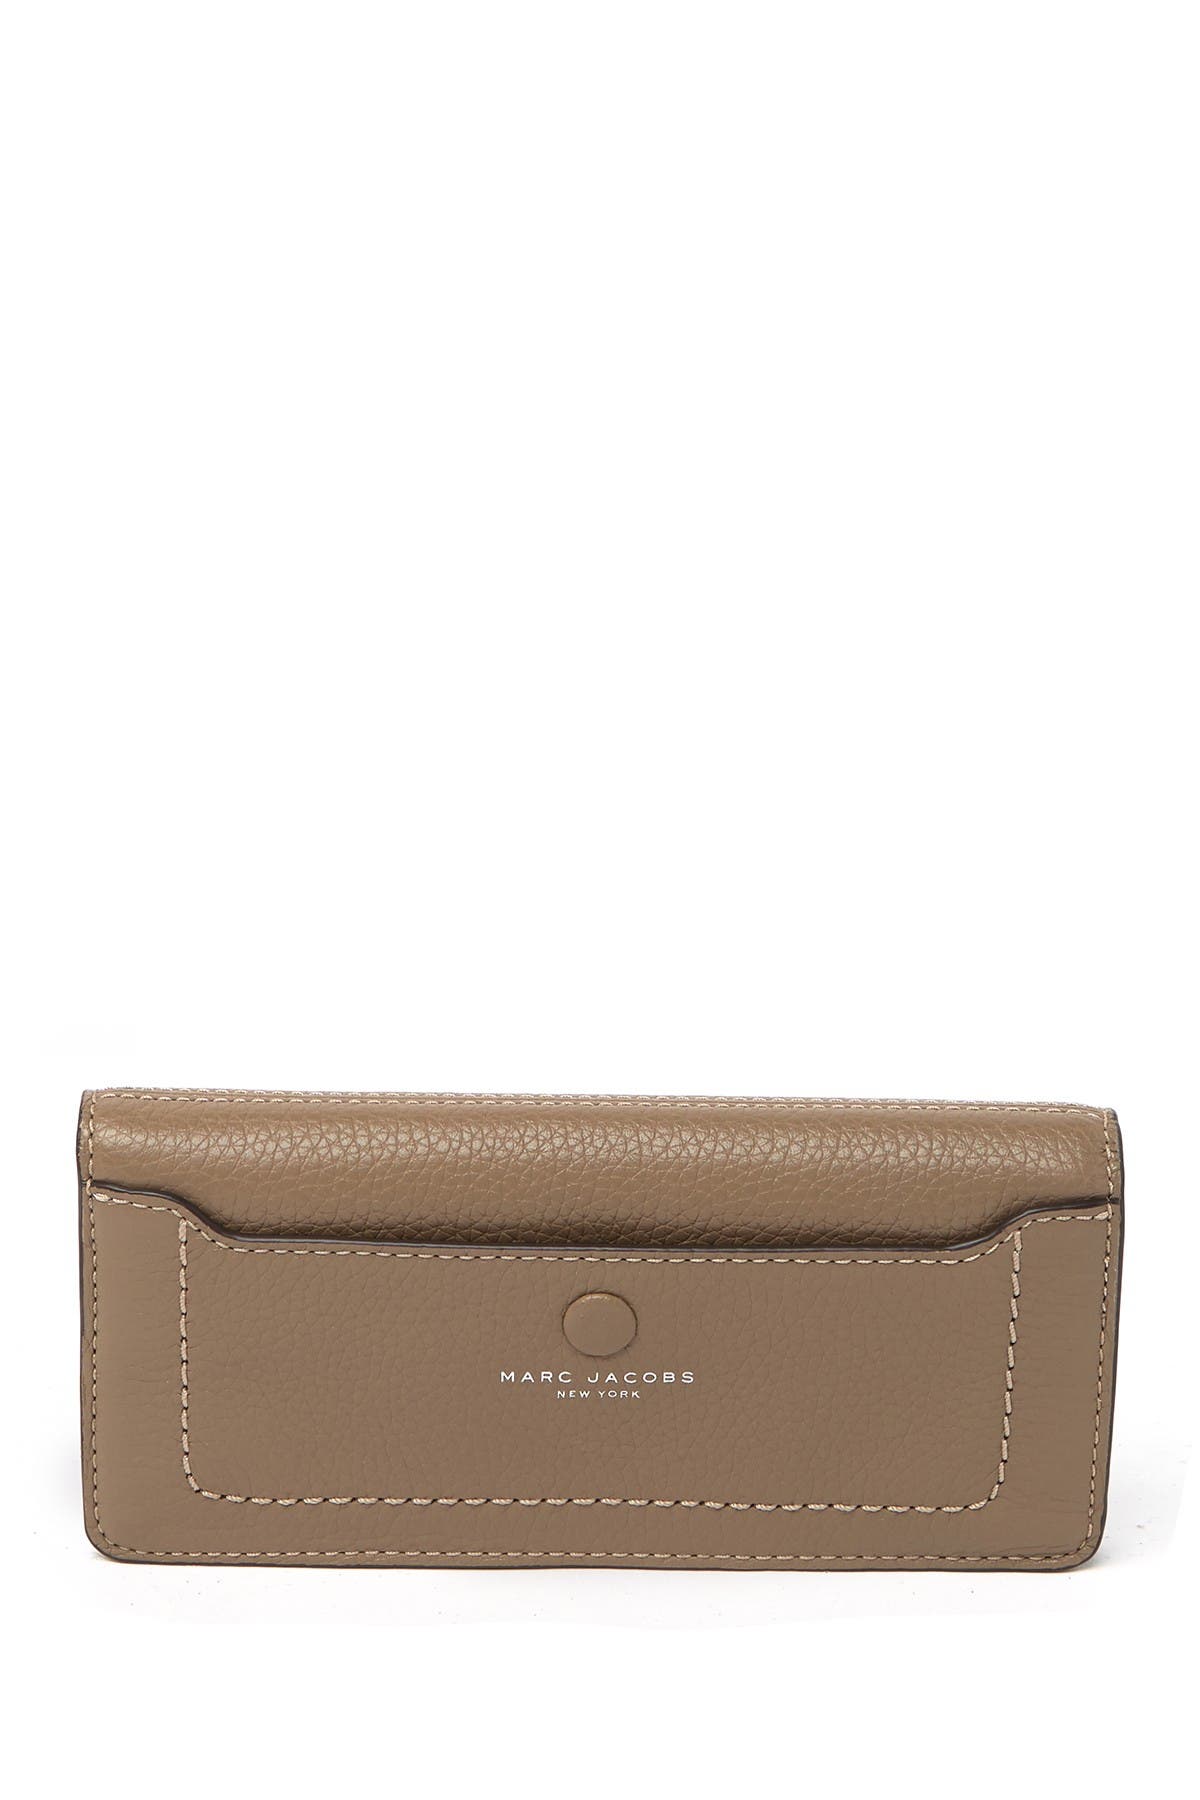 Marc Jacobs | Open Face Leather Wallet 